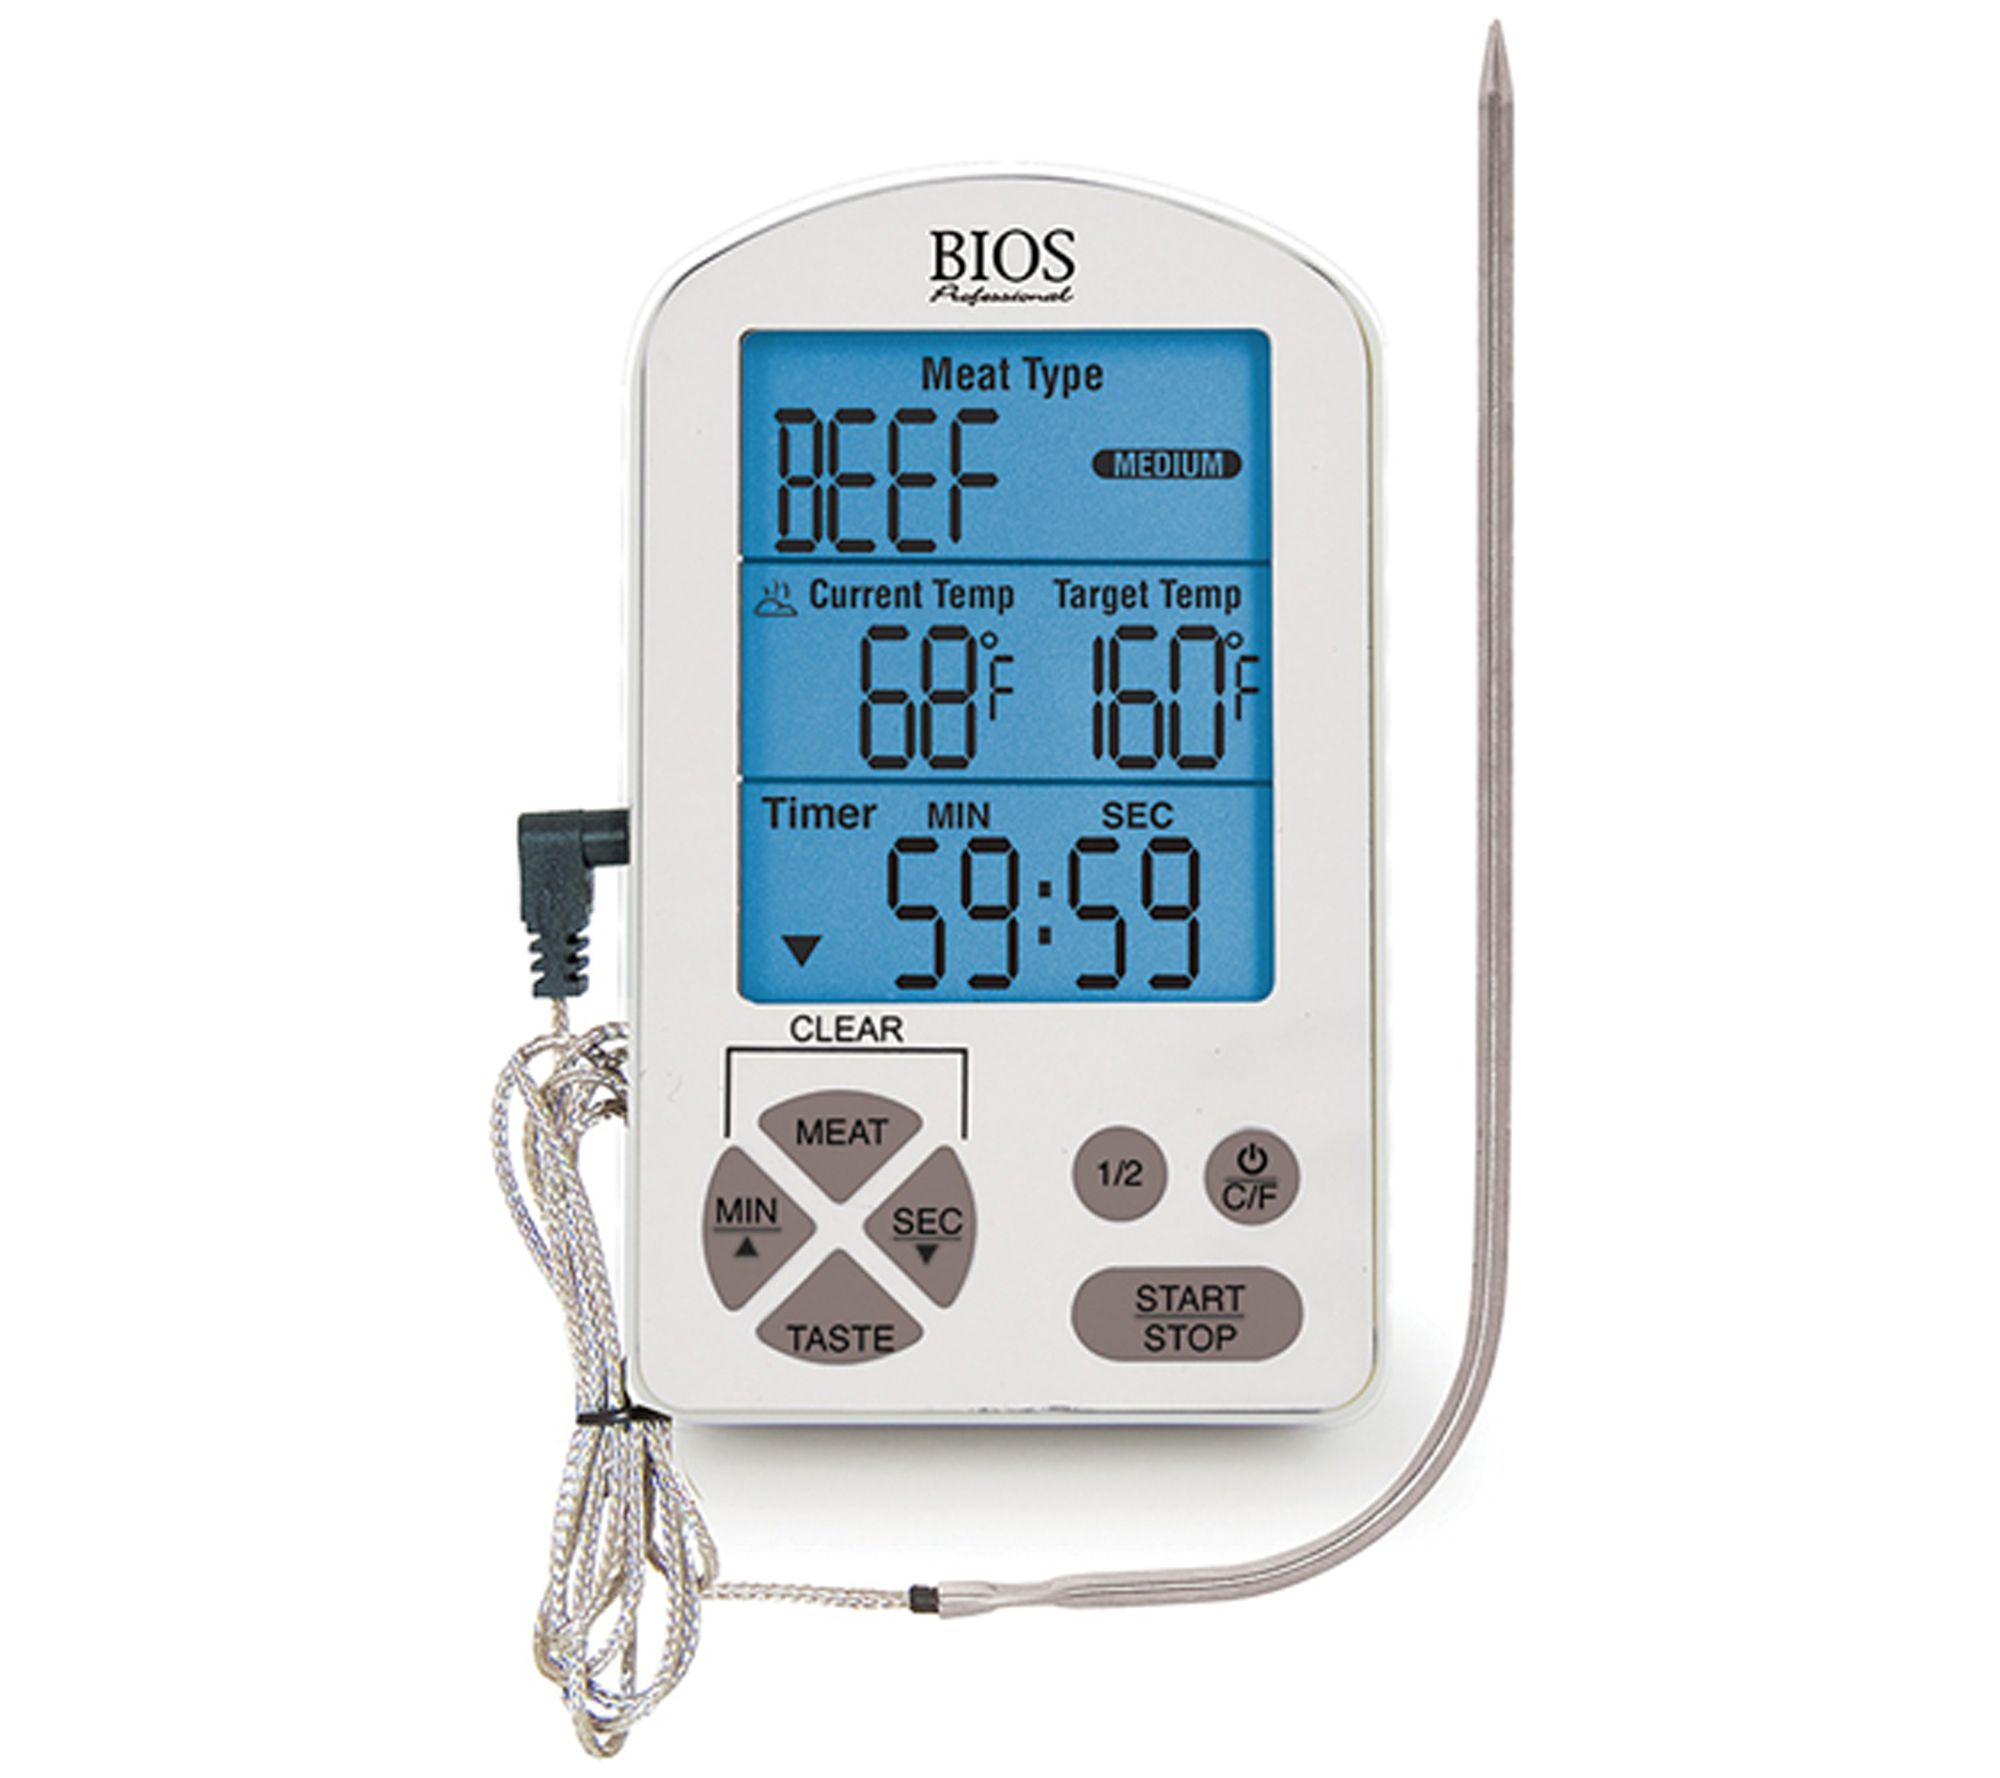 Taylor Precision Products Adjustable-Head Digital Thermometer 